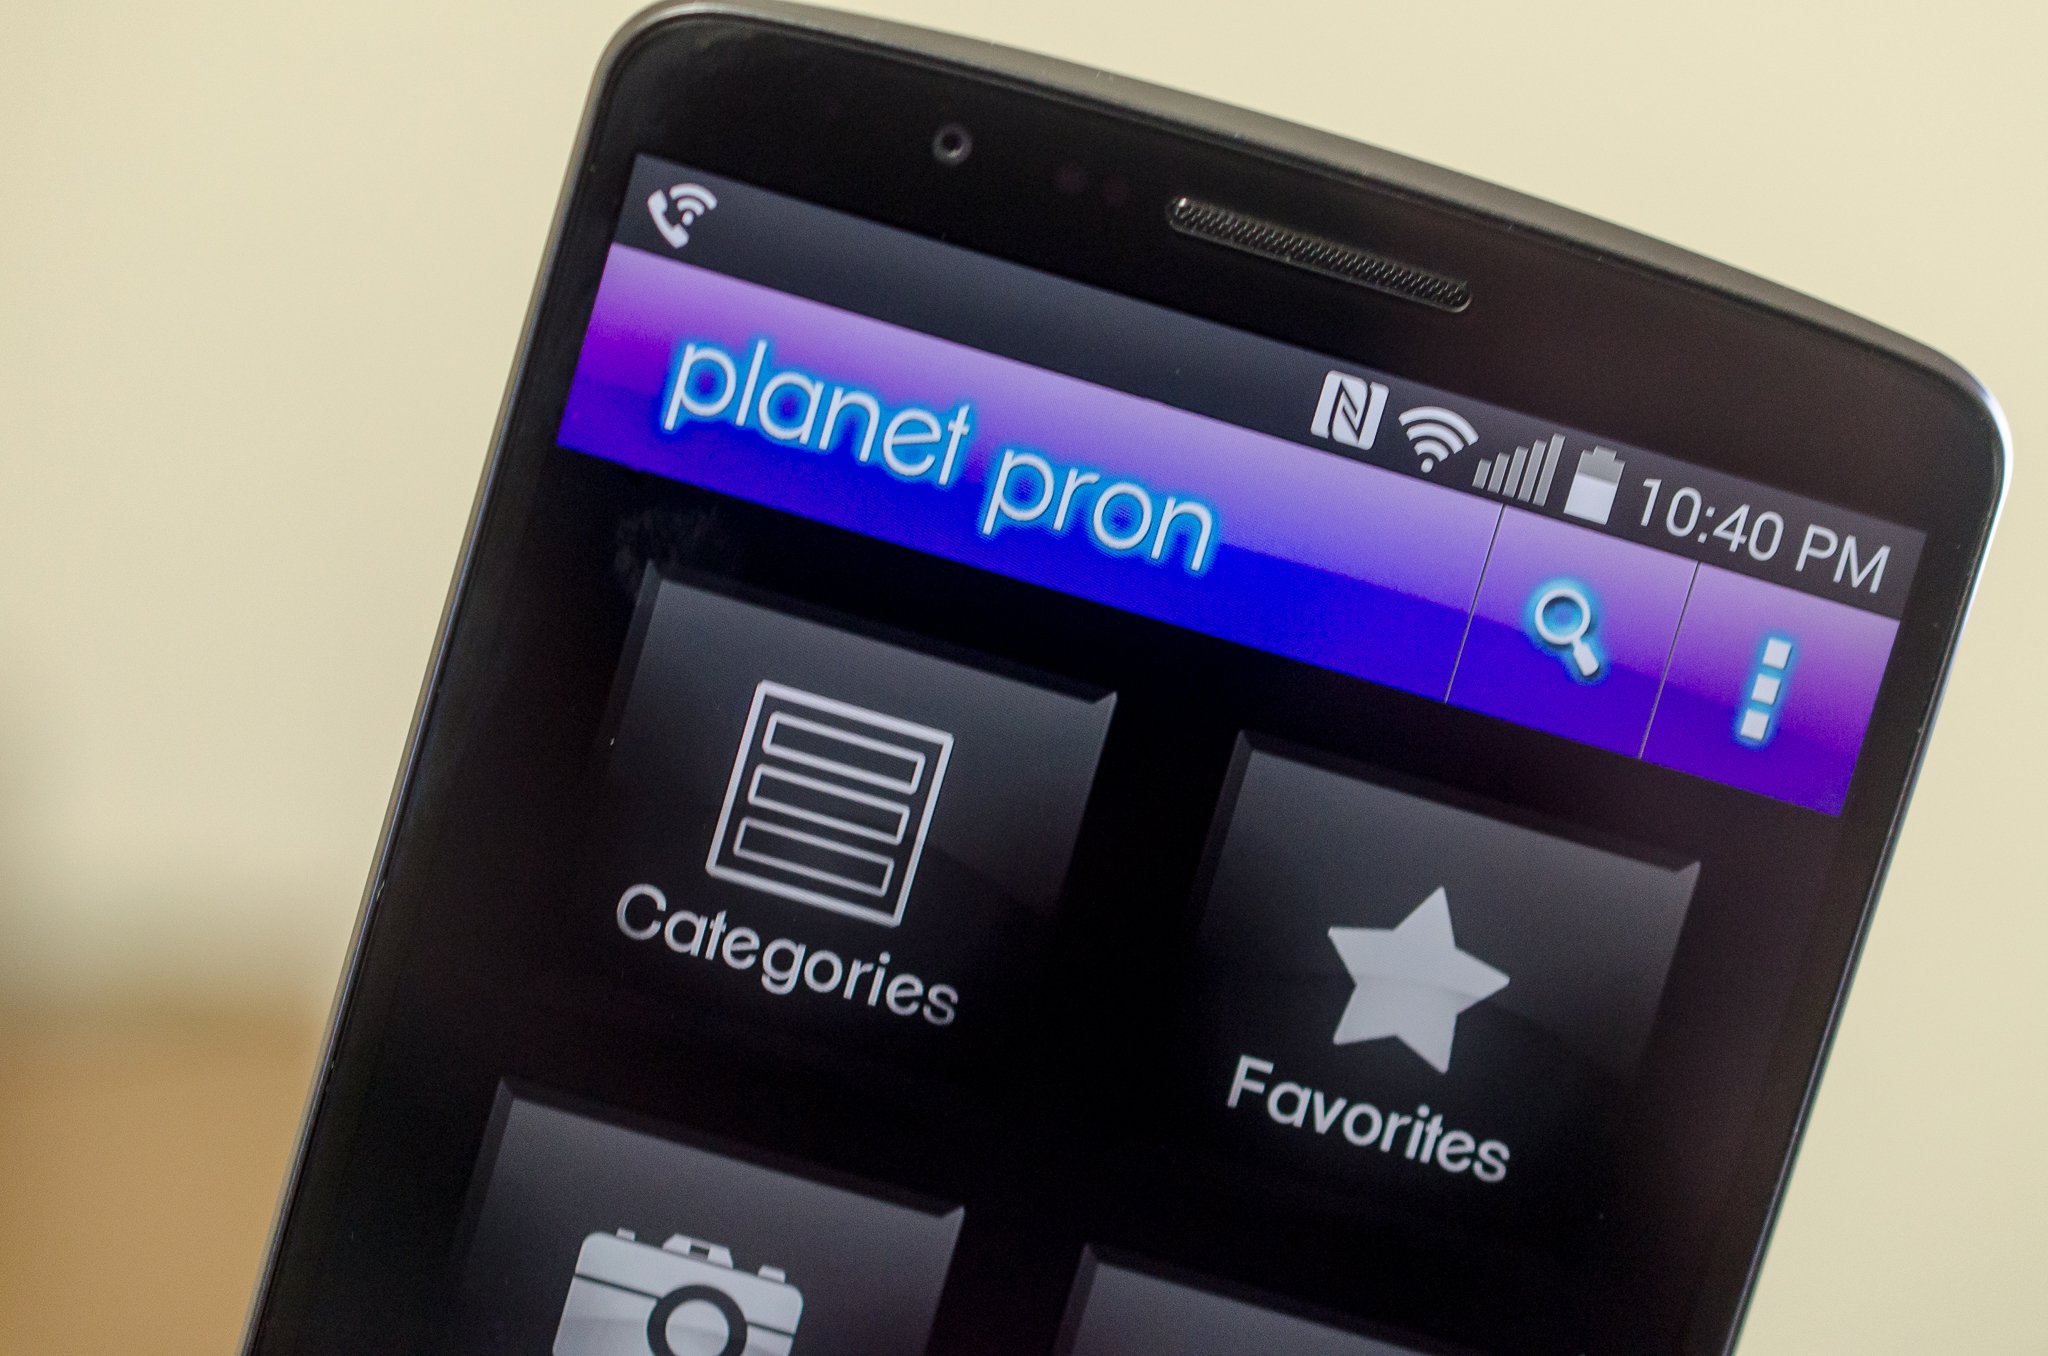 Planet Pron app for Android